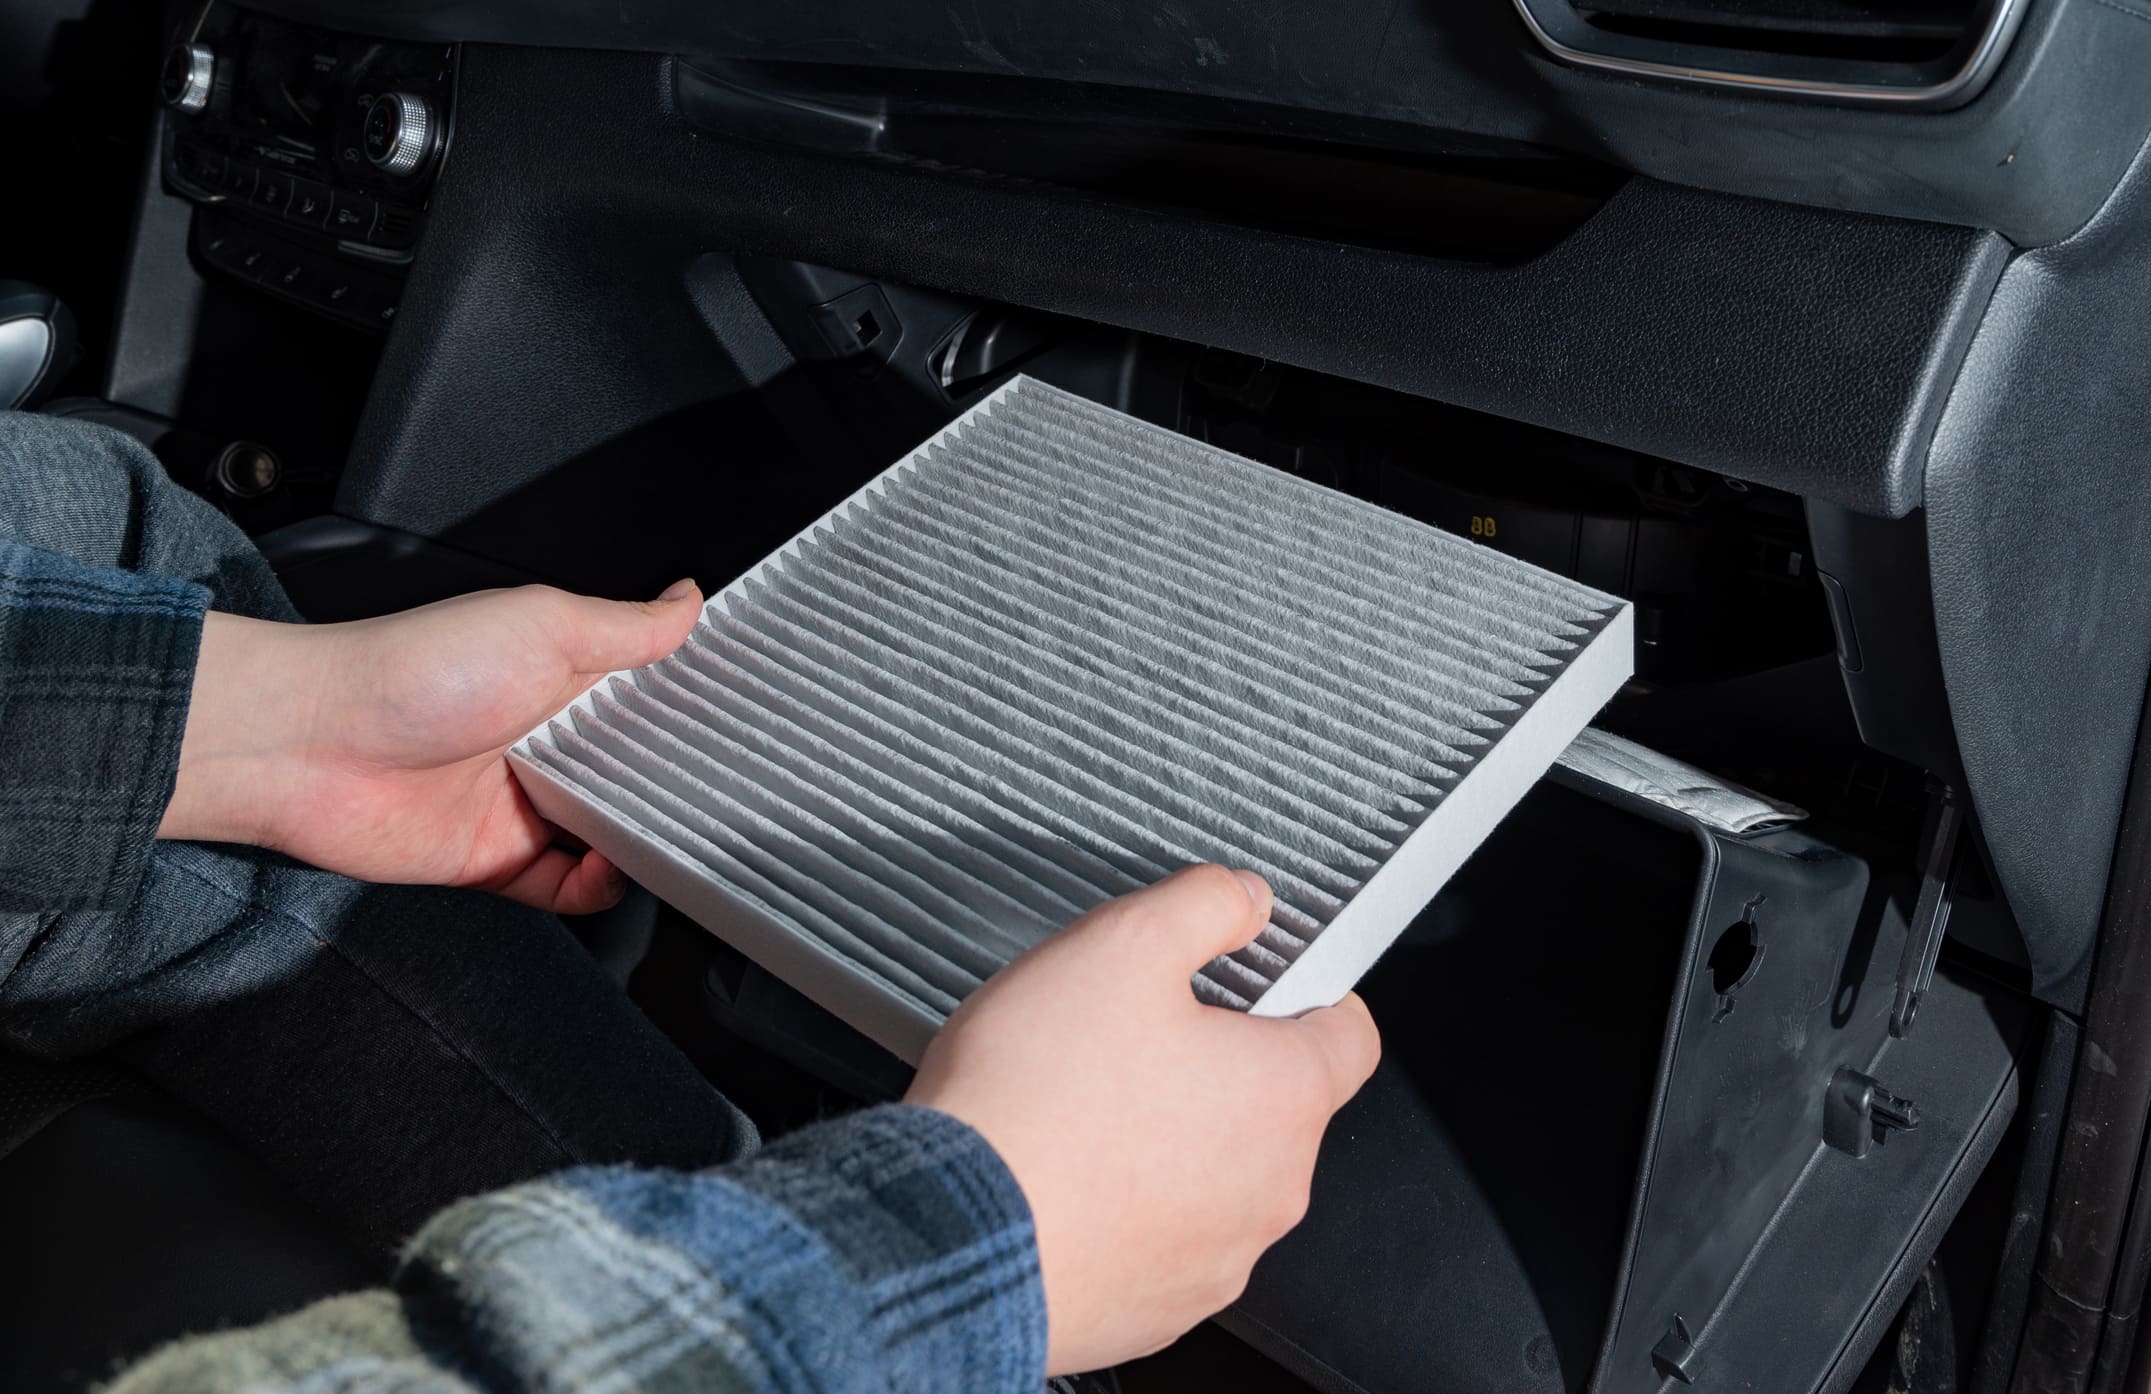 Clogged air filter can lead to car air conditioner malfunctions